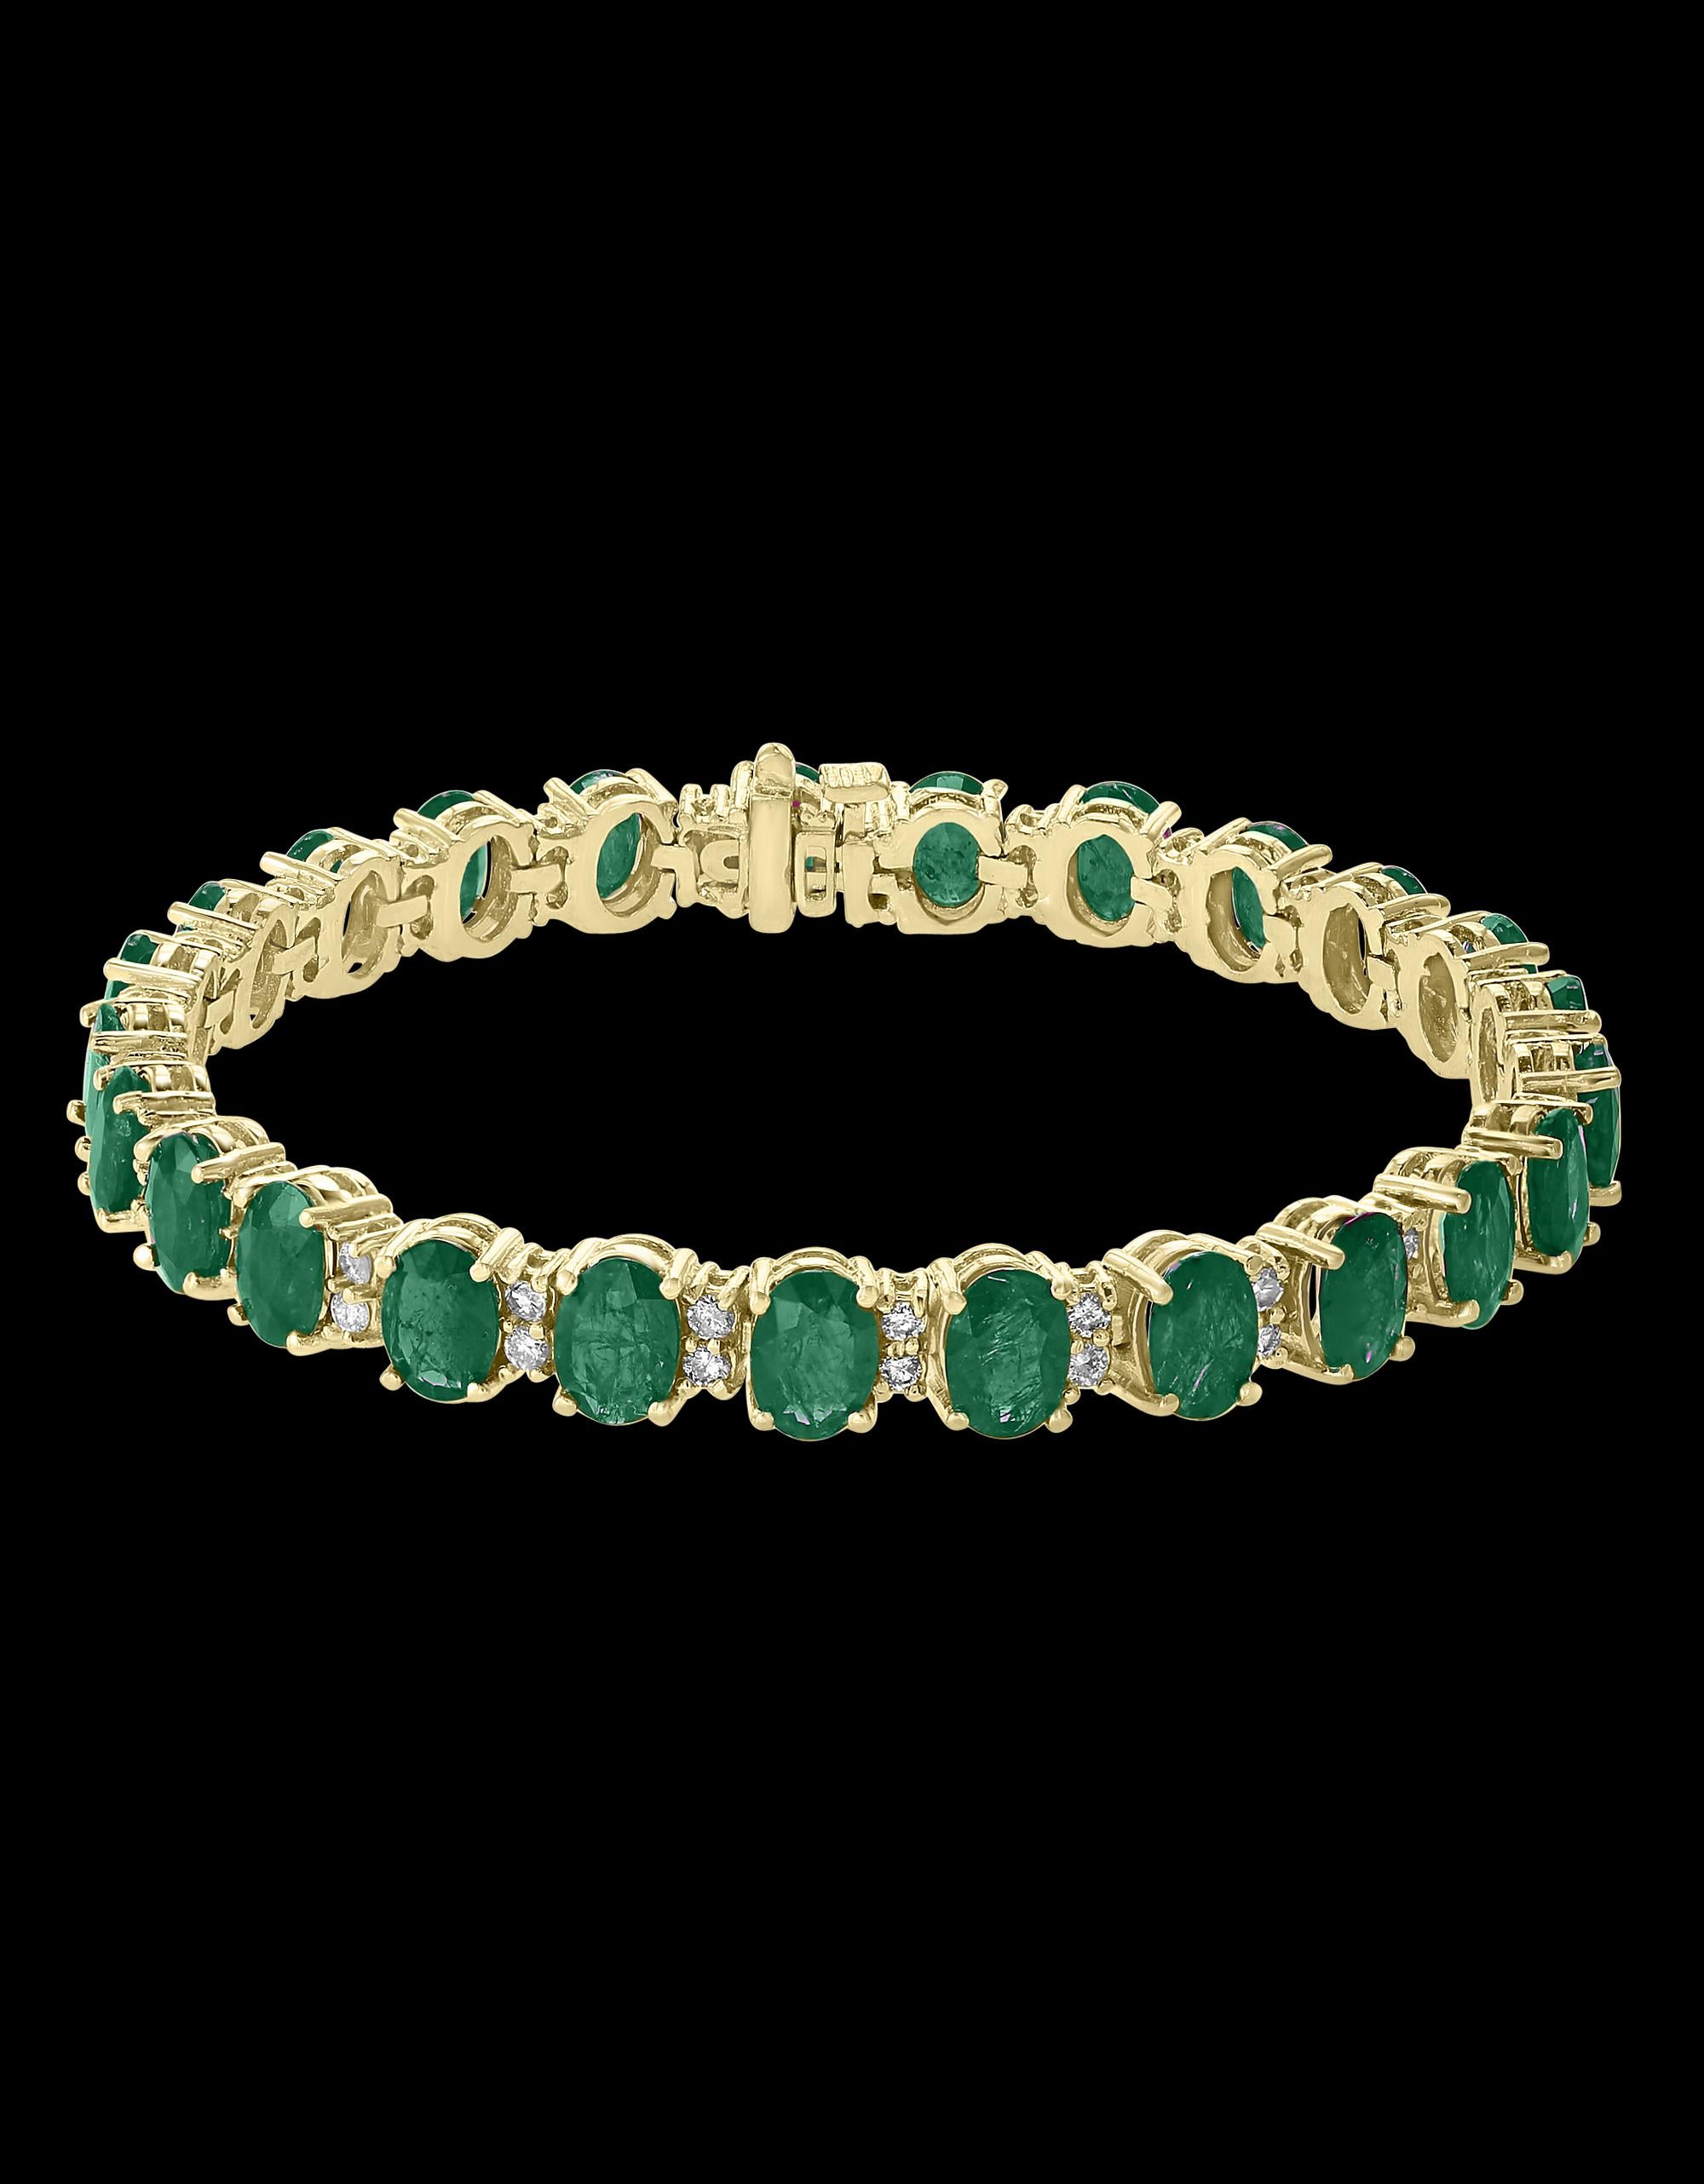  This exceptionally affordable Tennis  bracelet has  25 stones of oval  Emeralds  . Each Emerald is spaced by two diamonds .Total weight of Emerald is 25 carat. Total number of diamonds are 50 and diamond weighs 1.3 ct.
The bracelet is expertly